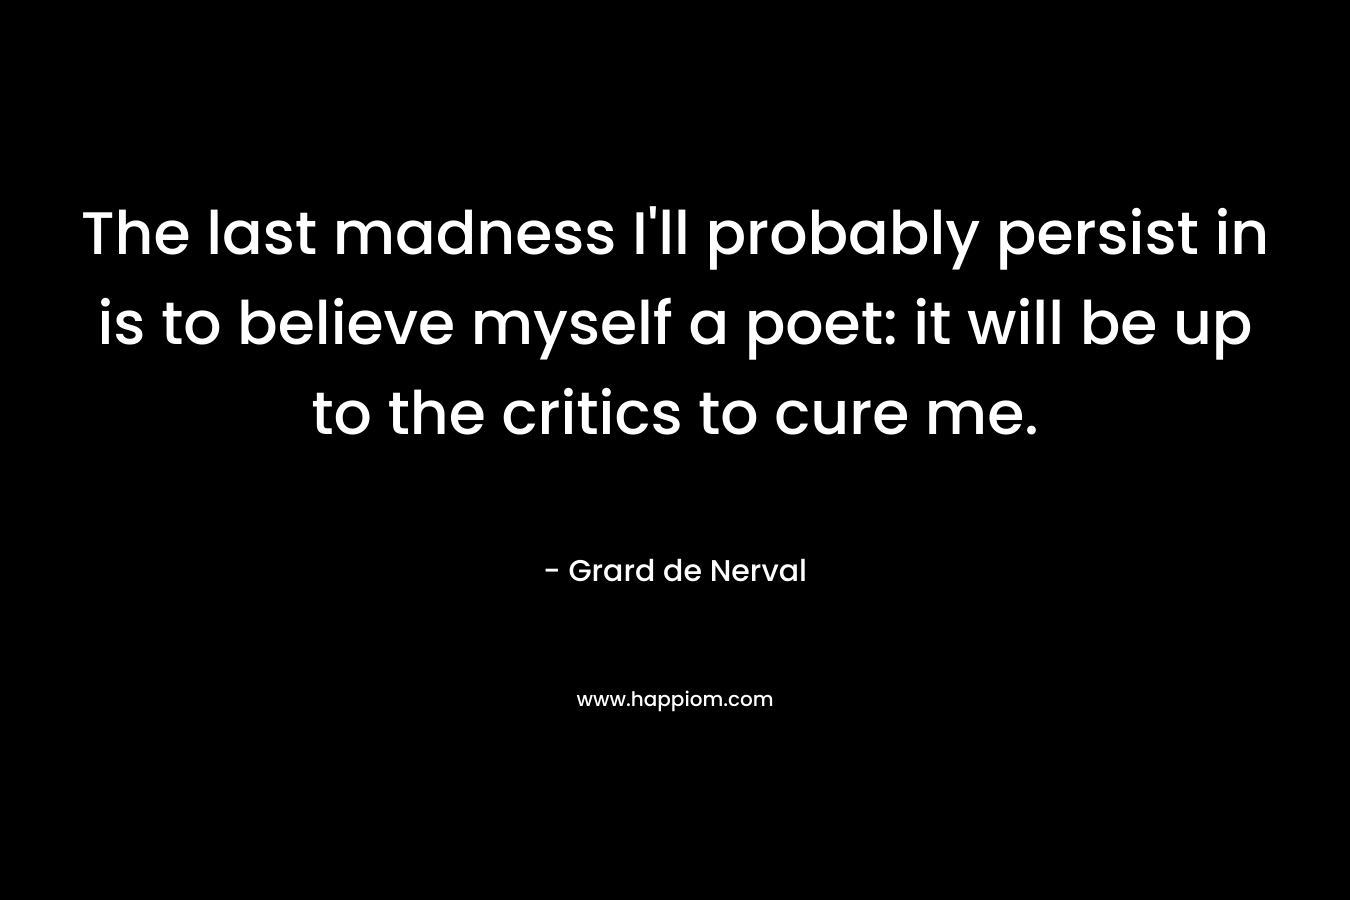 The last madness I’ll probably persist in is to believe myself a poet: it will be up to the critics to cure me. – Grard de Nerval